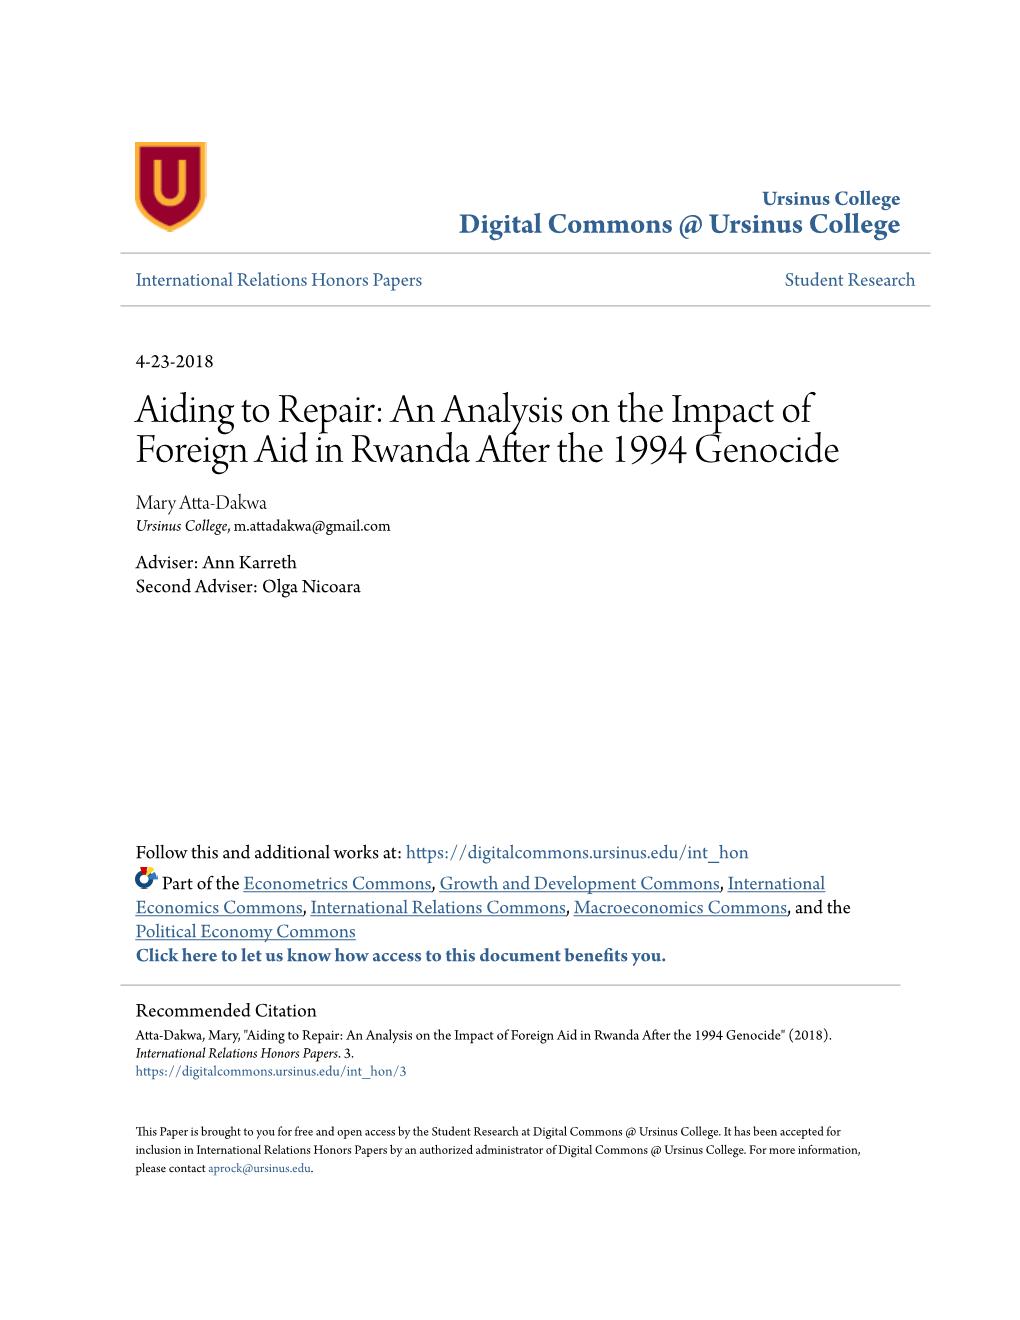 Aiding to Repair: an Analysis on the Impact of Foreign Aid in Rwanda After the 1994 Genocide